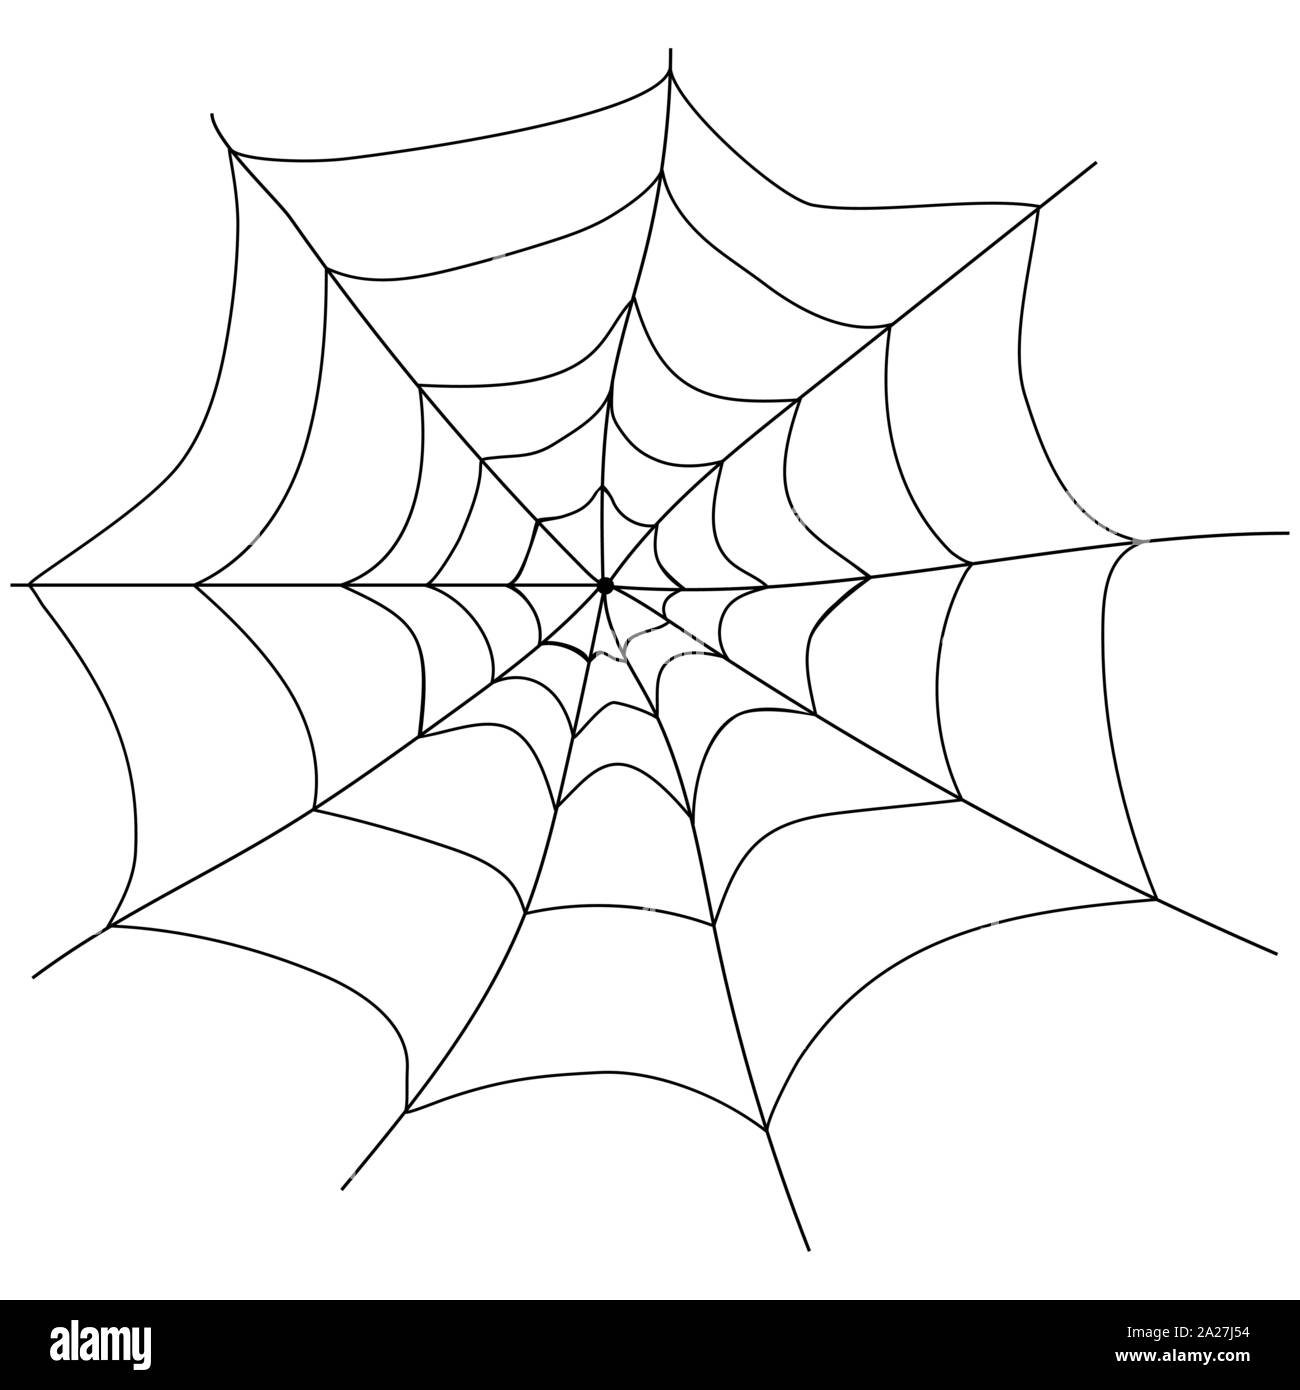 Spiders sit on a web. Black silhouettes Stock Vector